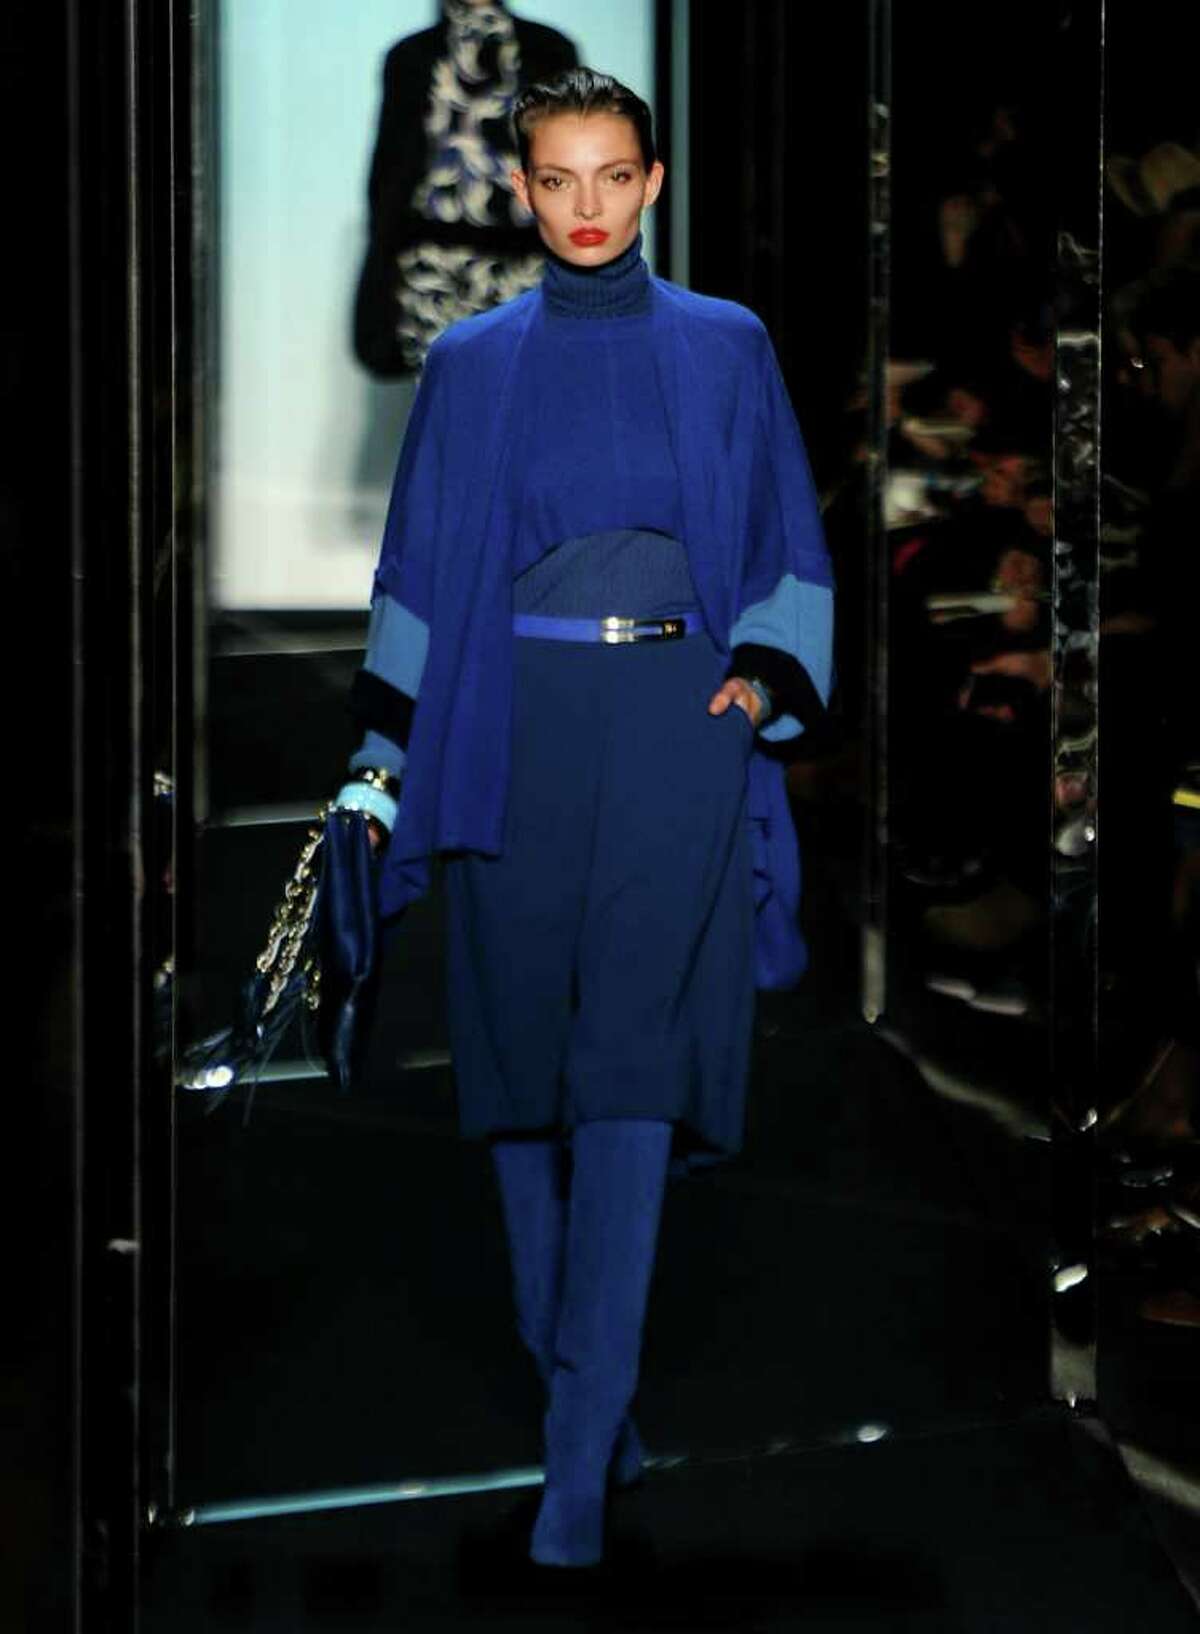 ONE TONE: Monochromatic dressing lengthens the torso. Diane von Furstenberg showed the look on her fall runways.